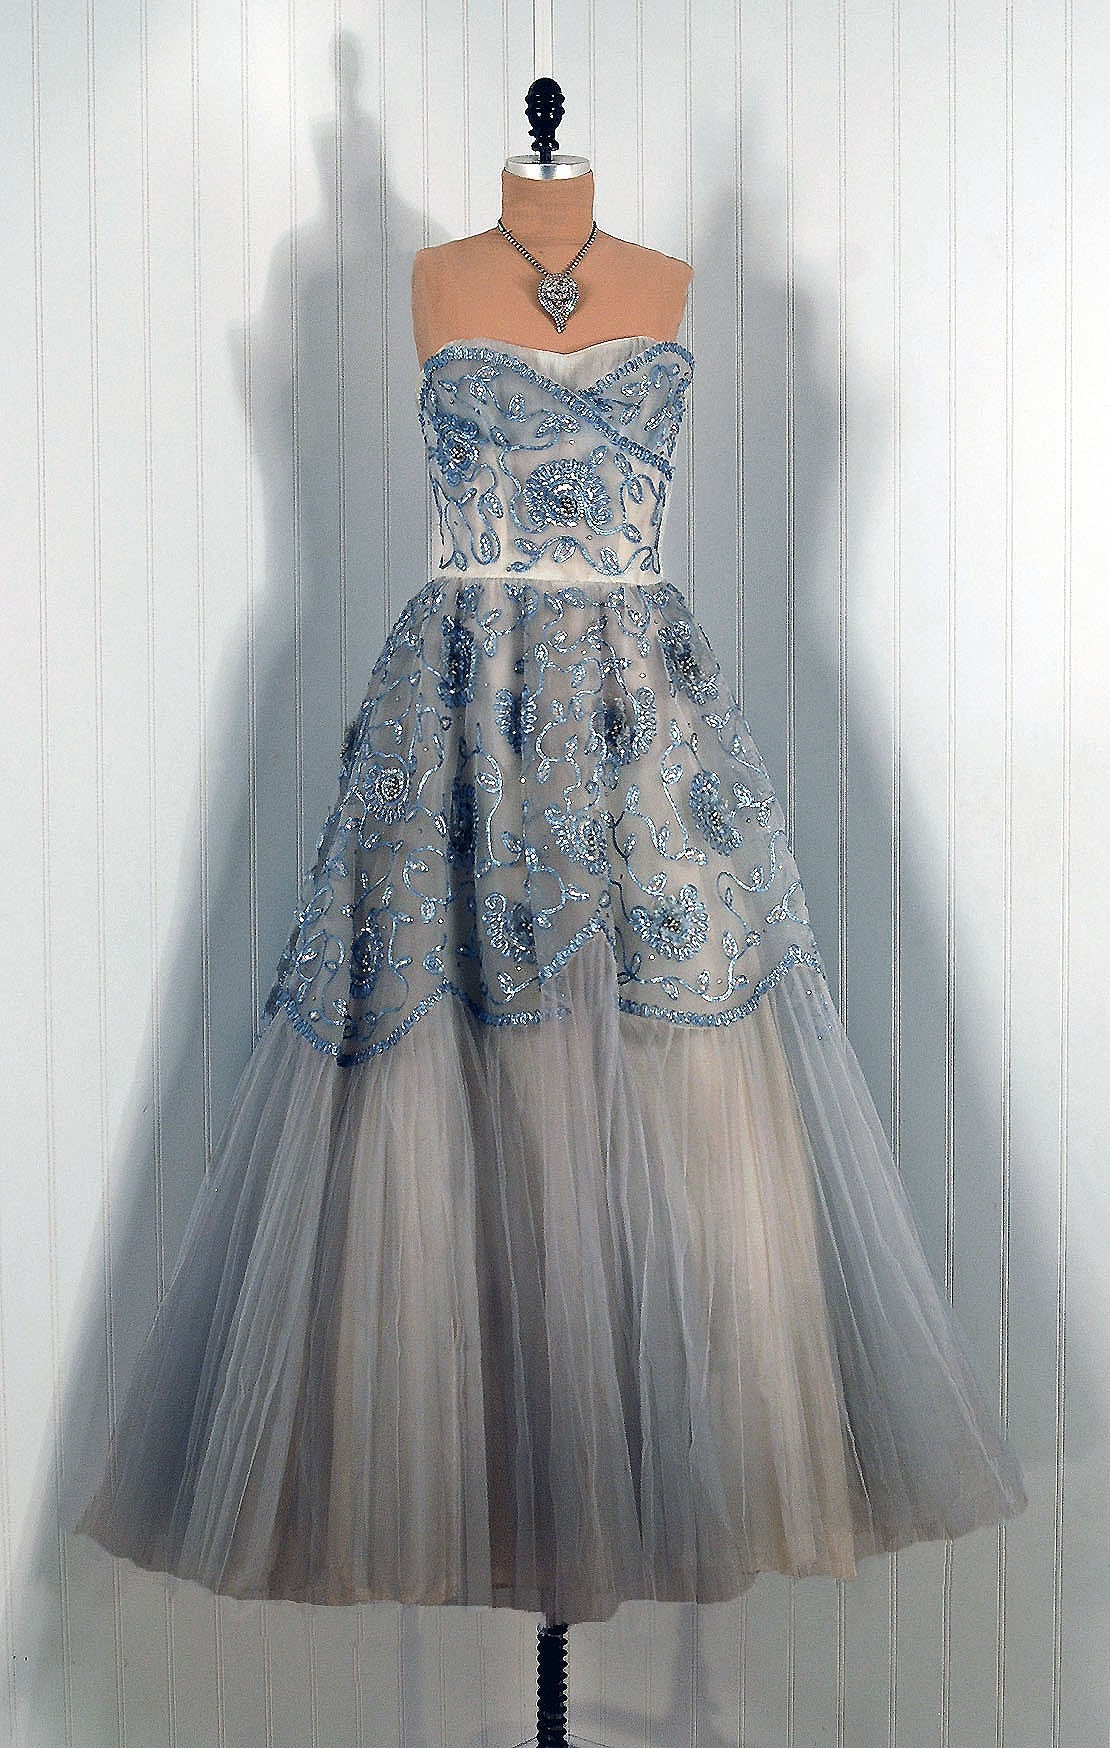 1950's Vintage Ceil Chapman Couture Strapless Steel-Blue Beaded Sequin and Rhinestone Tulle Circle-Skirt Princess Wedding Party Gown Dress